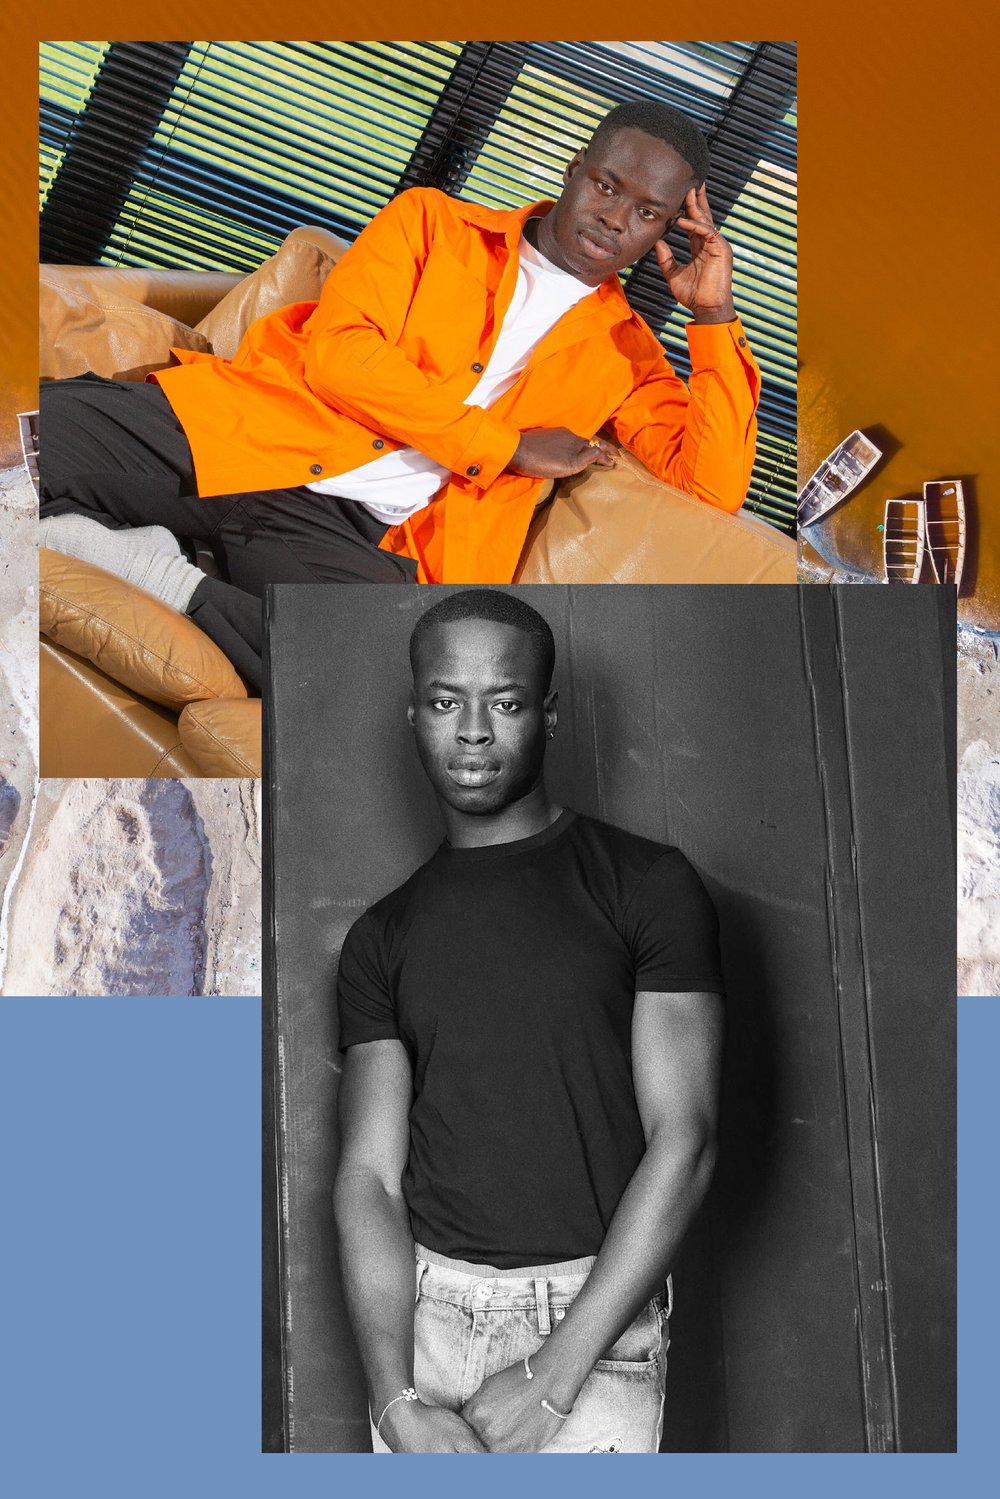 How Ibrahim Kamara Found His Place in Fashion - The New York Times